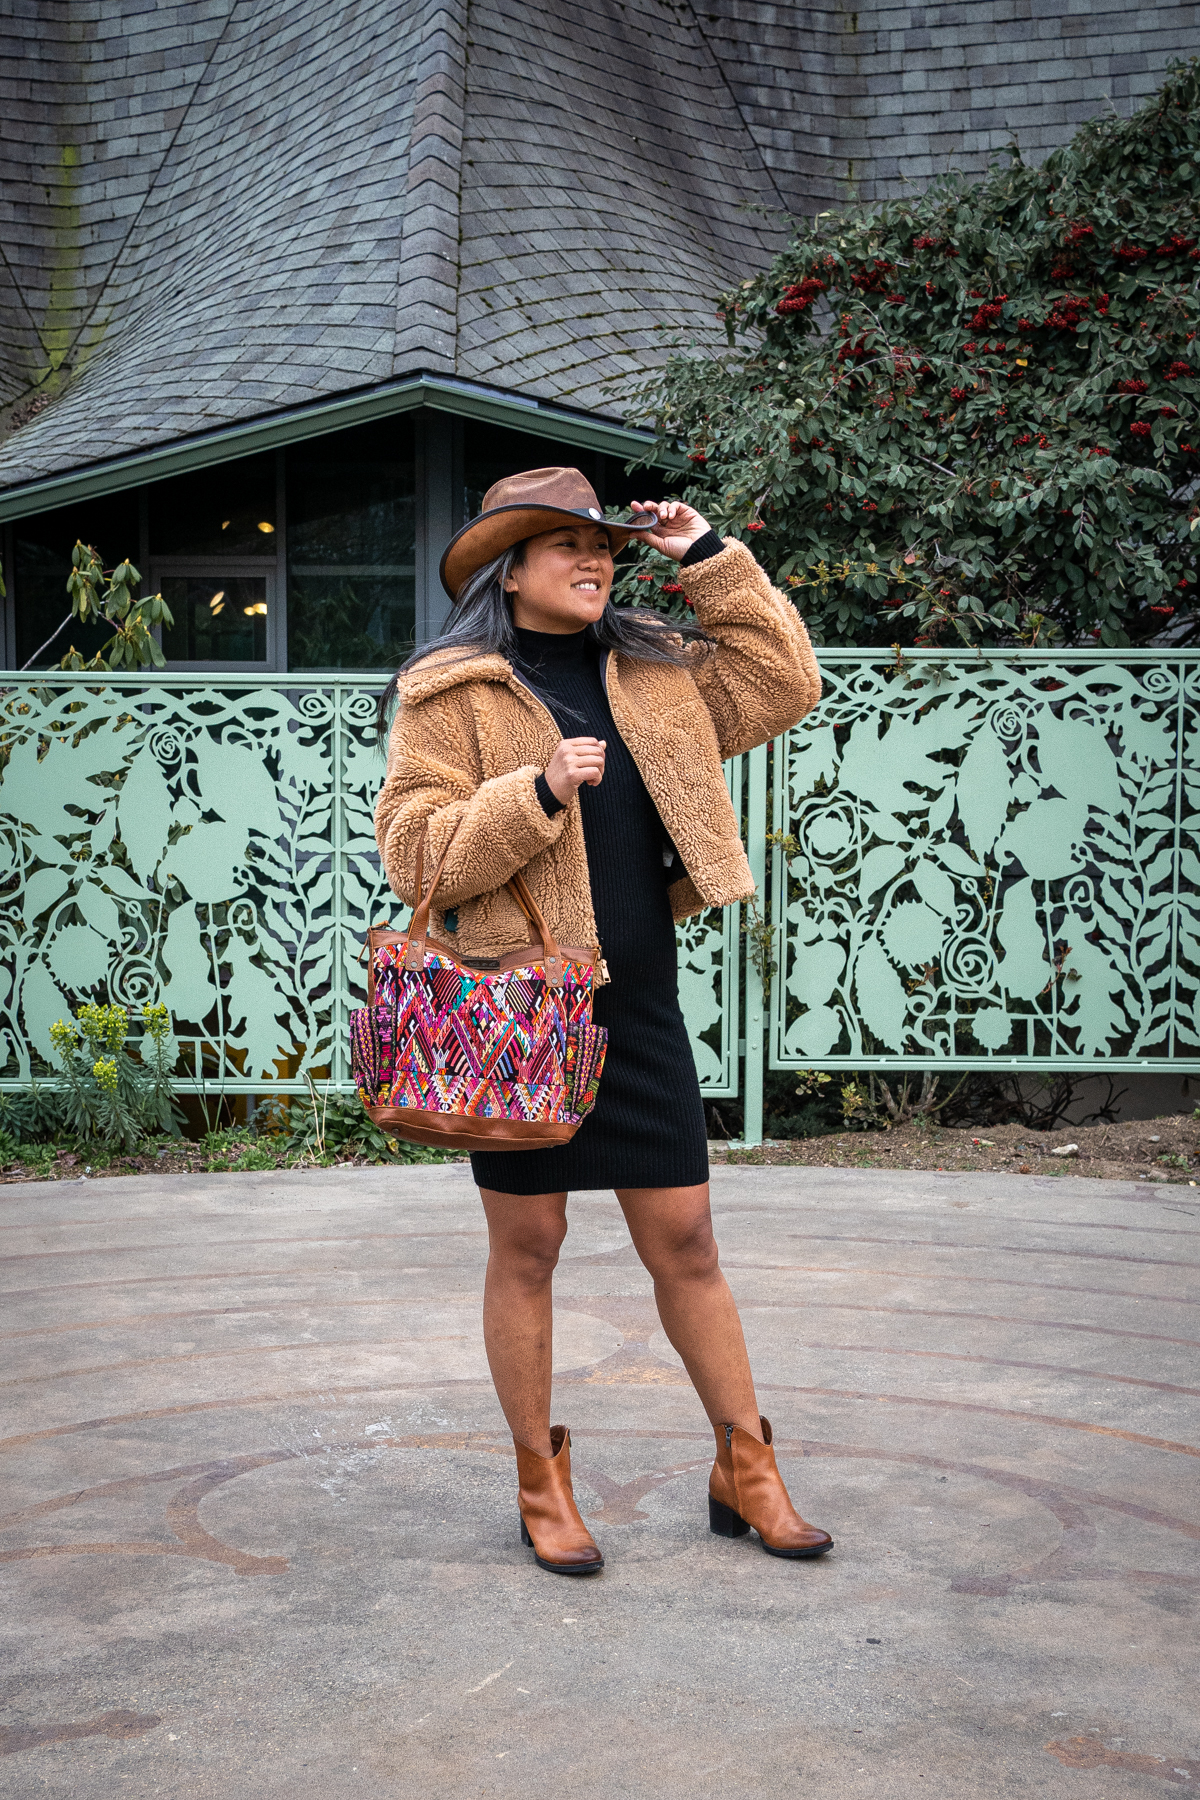 Nena and Co Review clarks booties alice and olivia dress carbon38 sherpa teddy jacket american hat makers cyclone cowboy hat